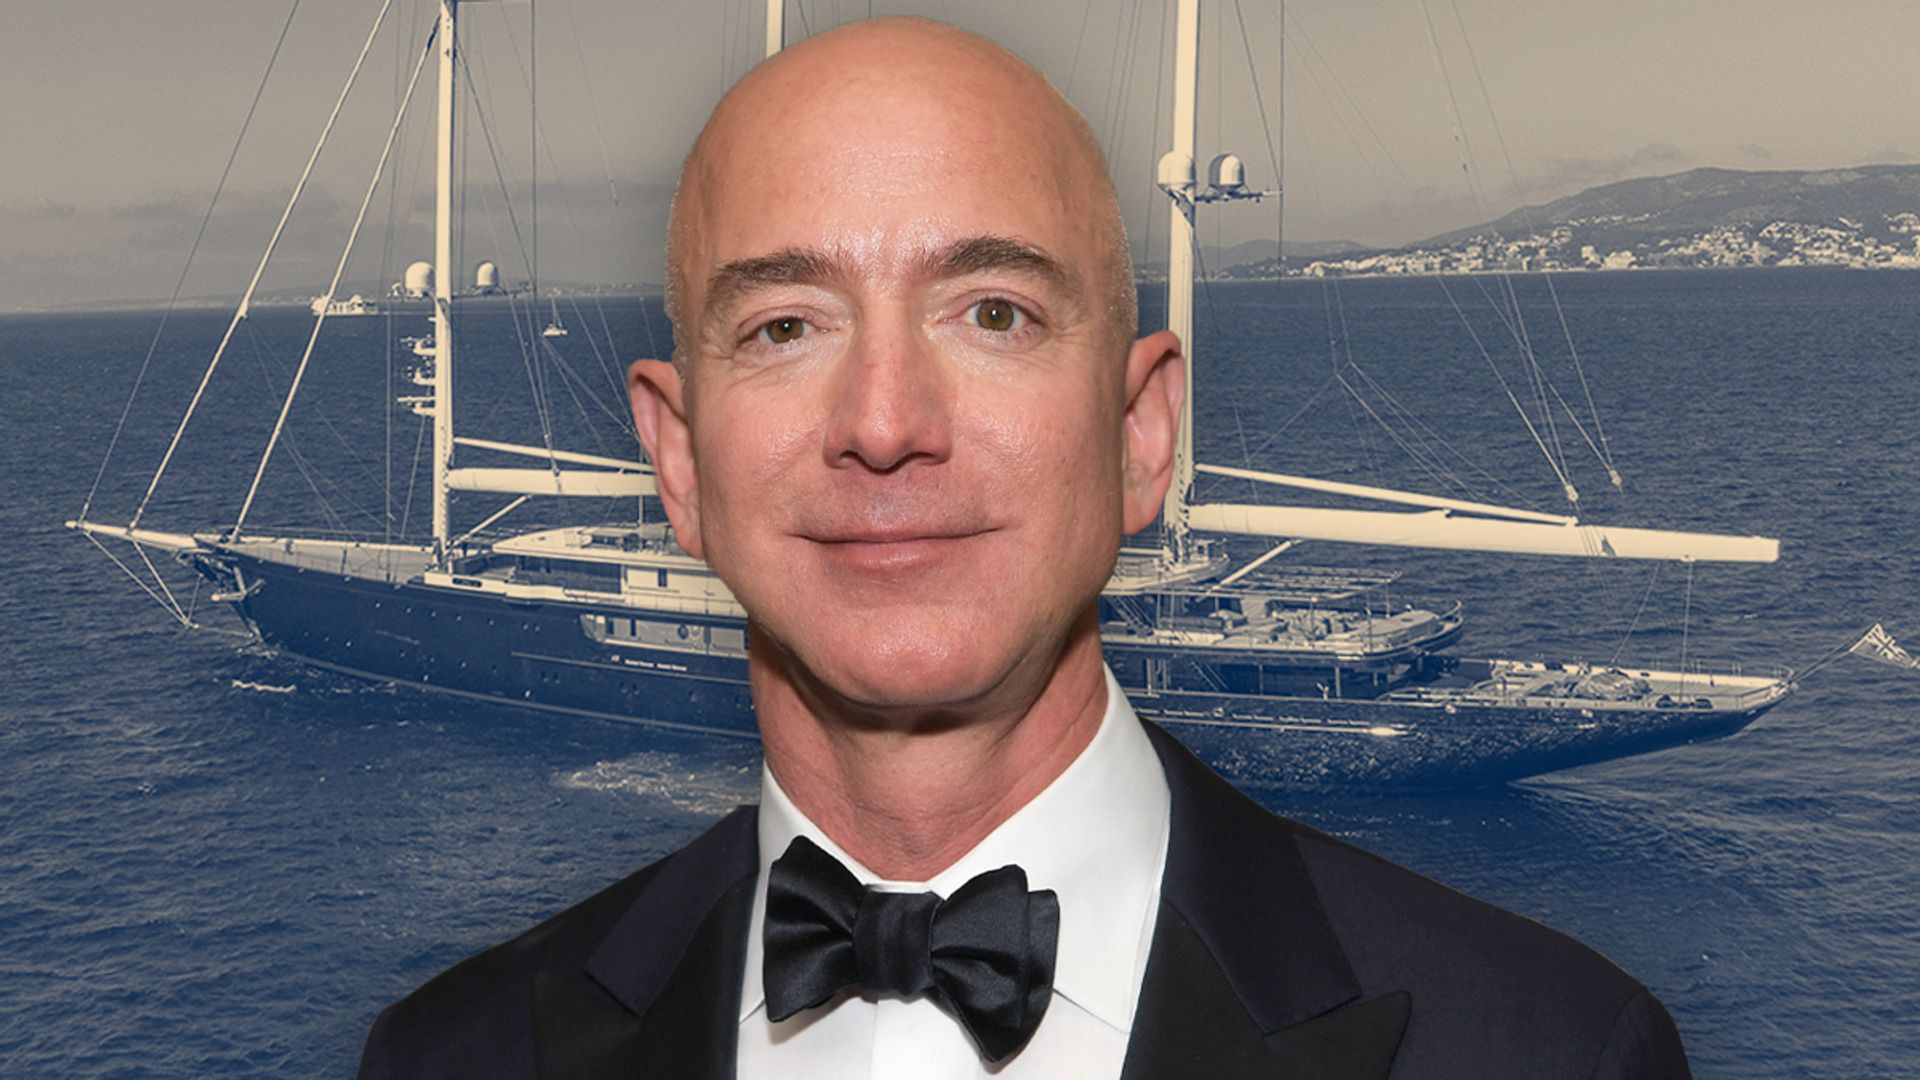 Jeff Bezos in a black tuxedo in the foreground and his Koru yacht in the background